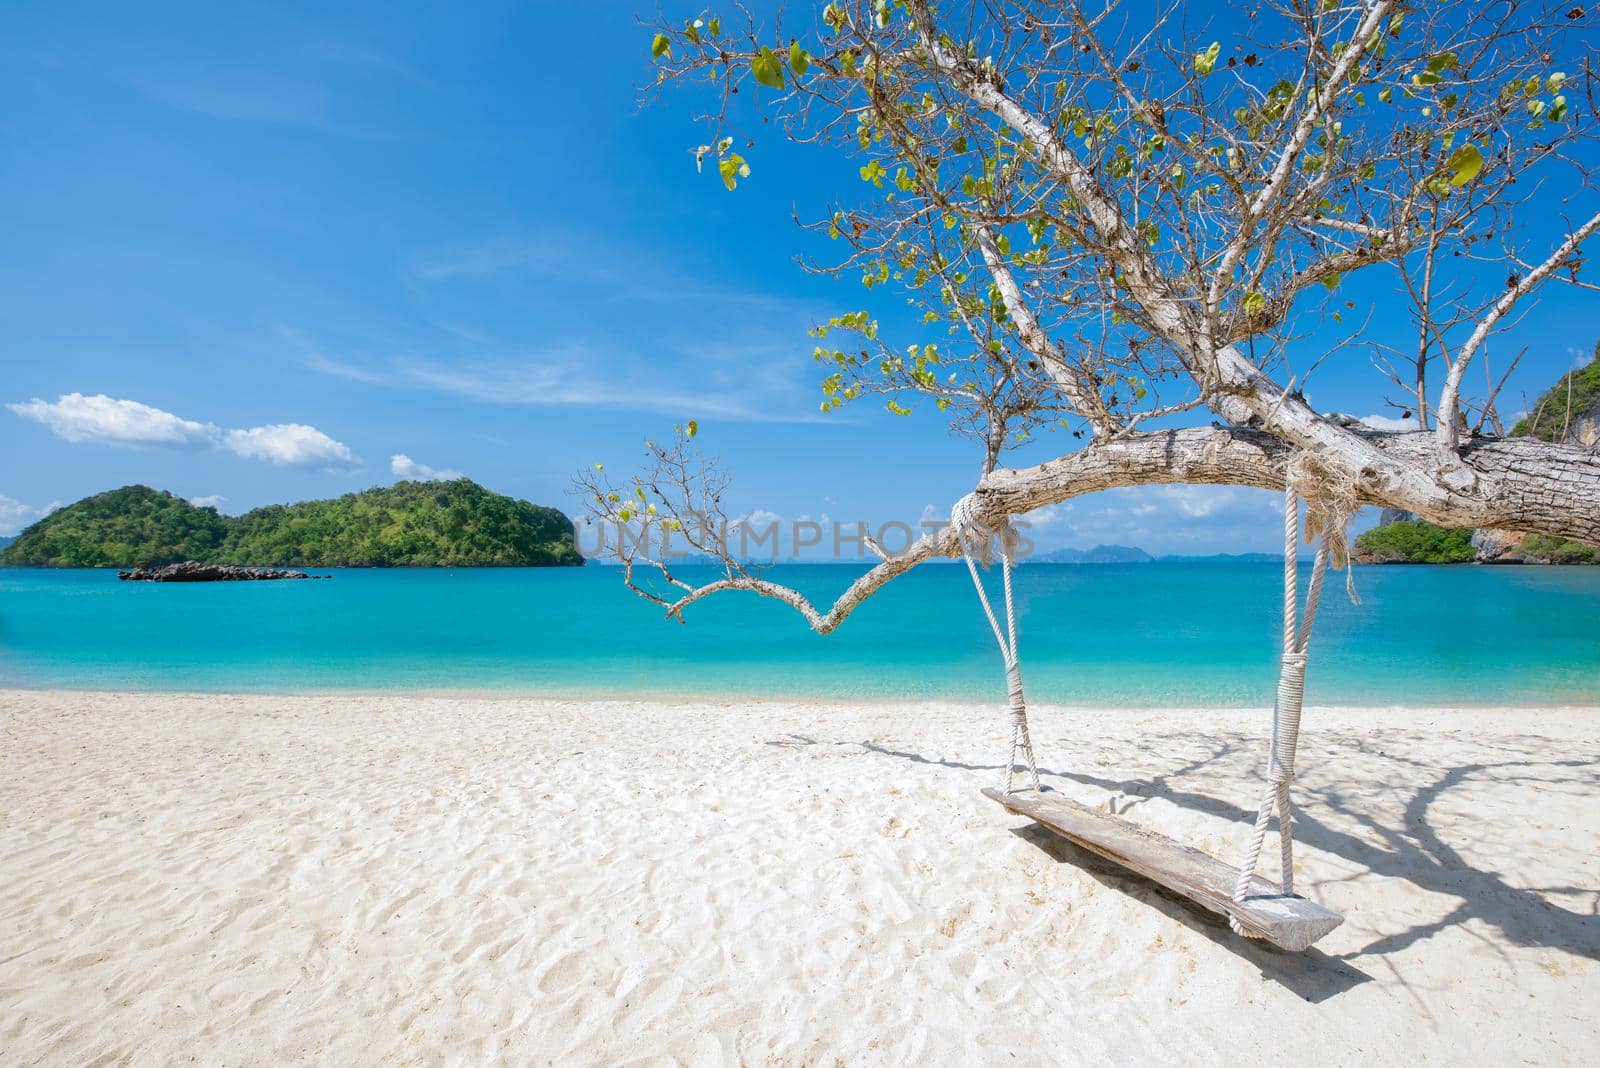 Wooden swing hang under tree at Koh Phak Bia Island, Krabi, Thailand. Travel destination and nature environment concept , summer holiday background.